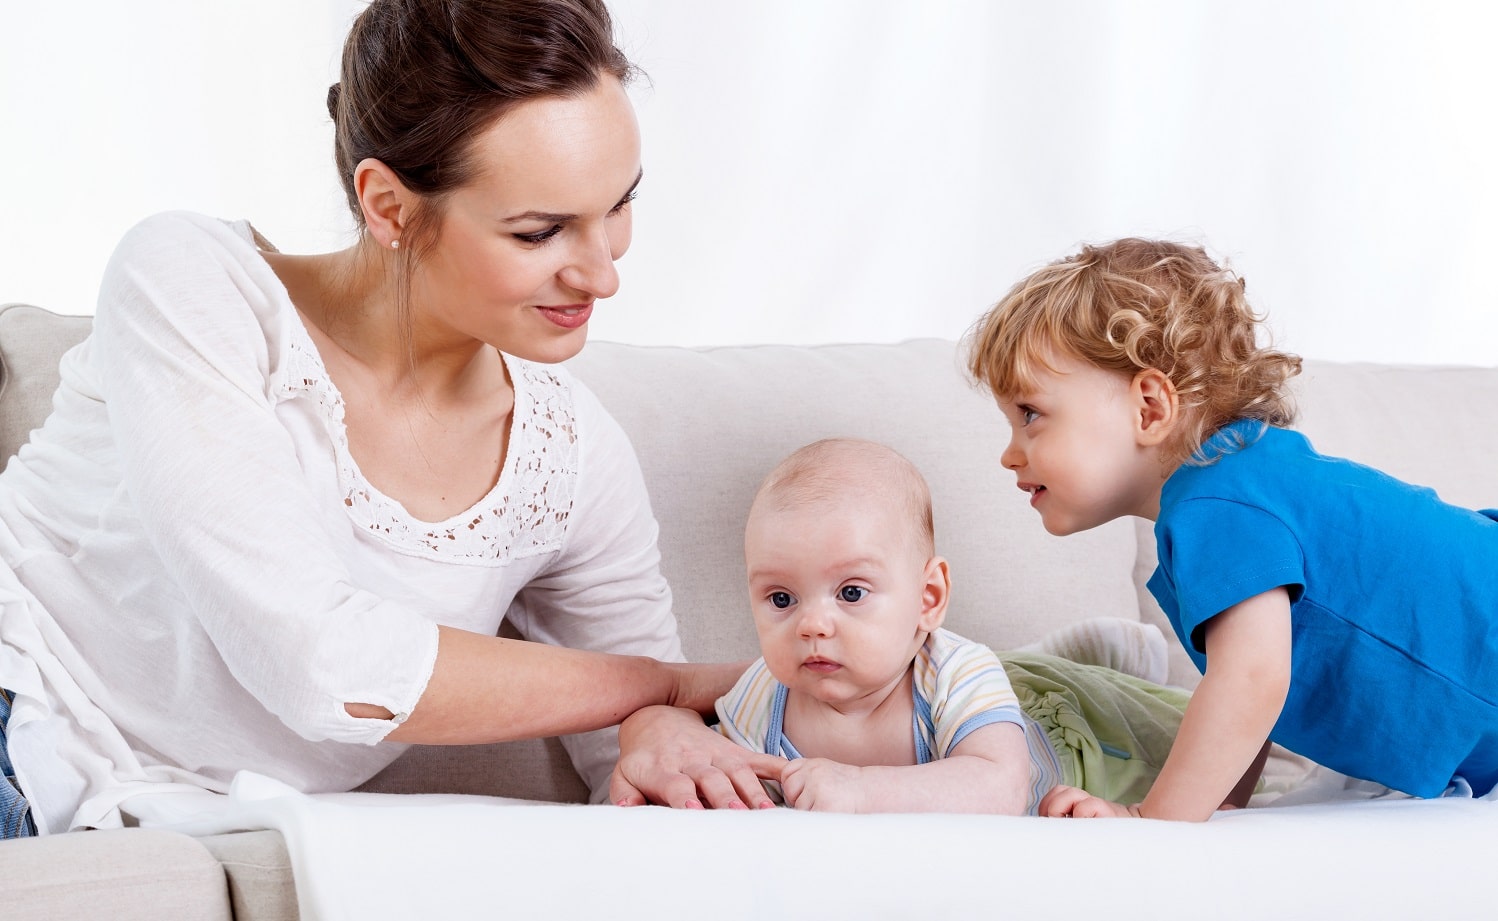 how should a mom behave with their kids 1 - How Should A Mom Behave with Their Kids?